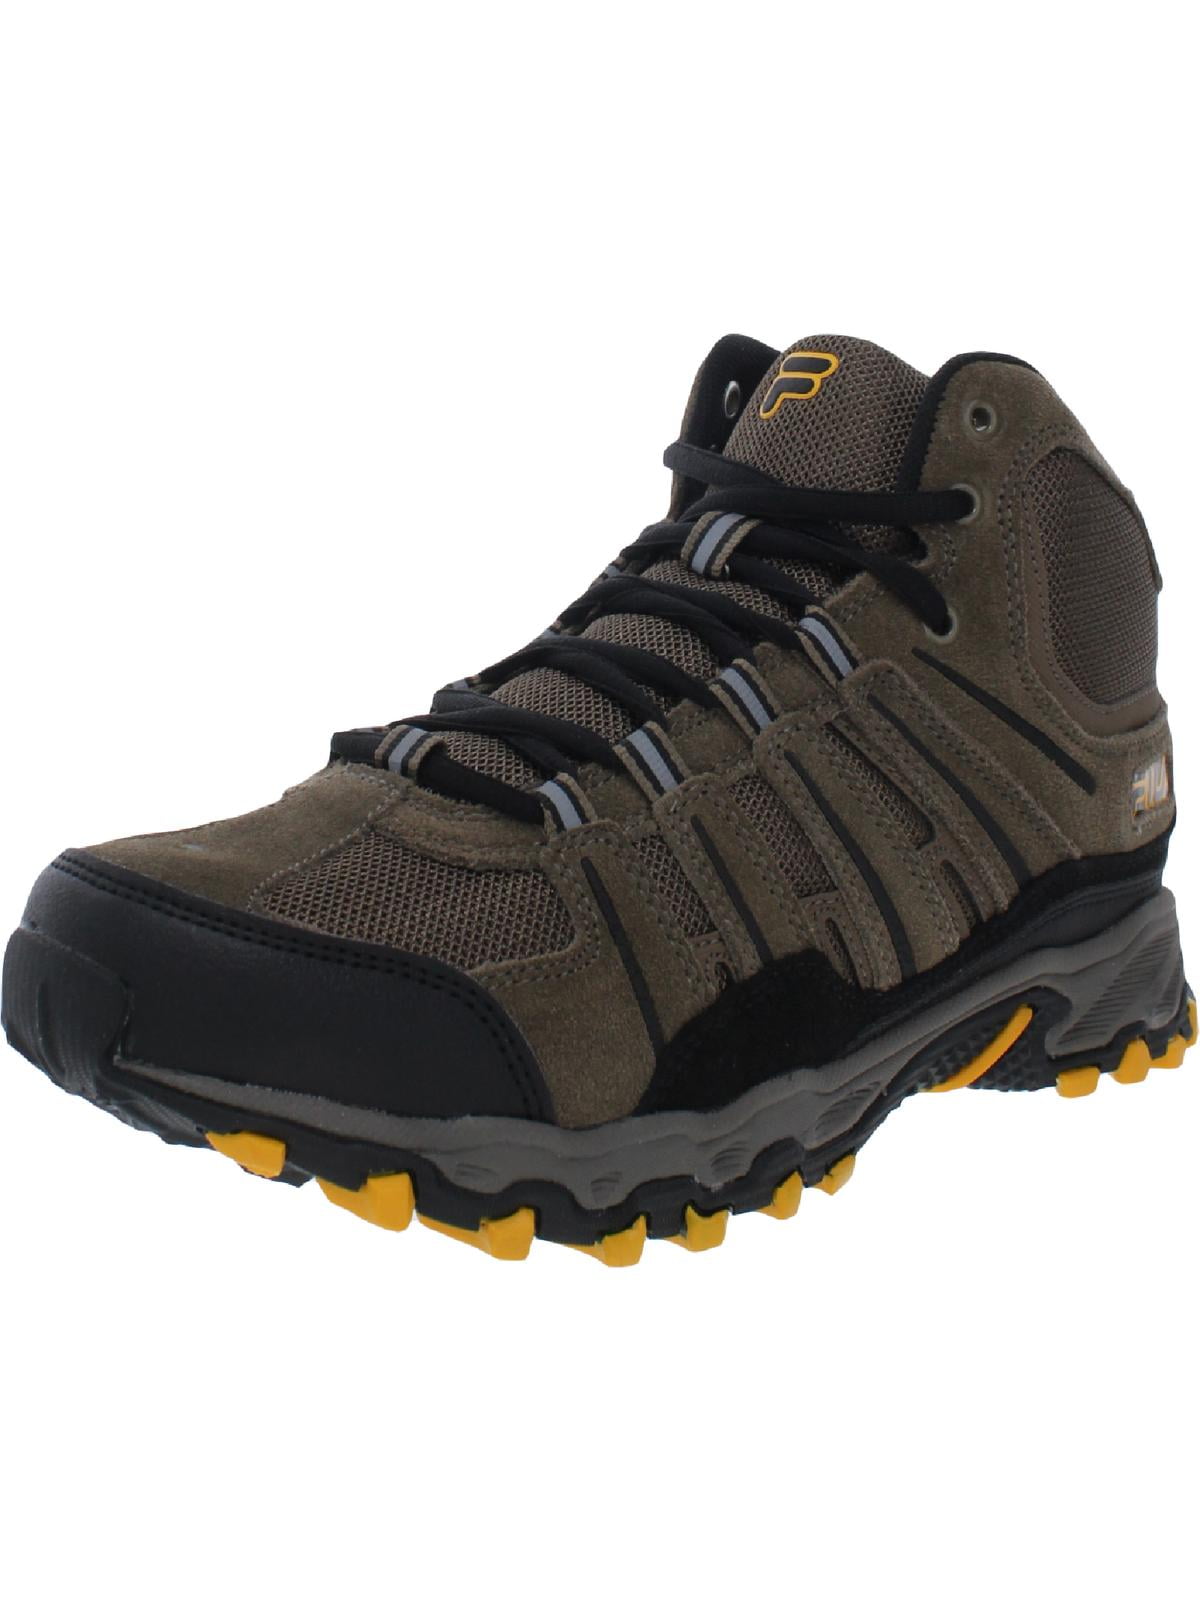 Fila Mens Country TG Evo Mid Outdoor Hiking Shoes Brown 8 Extra Wide ...